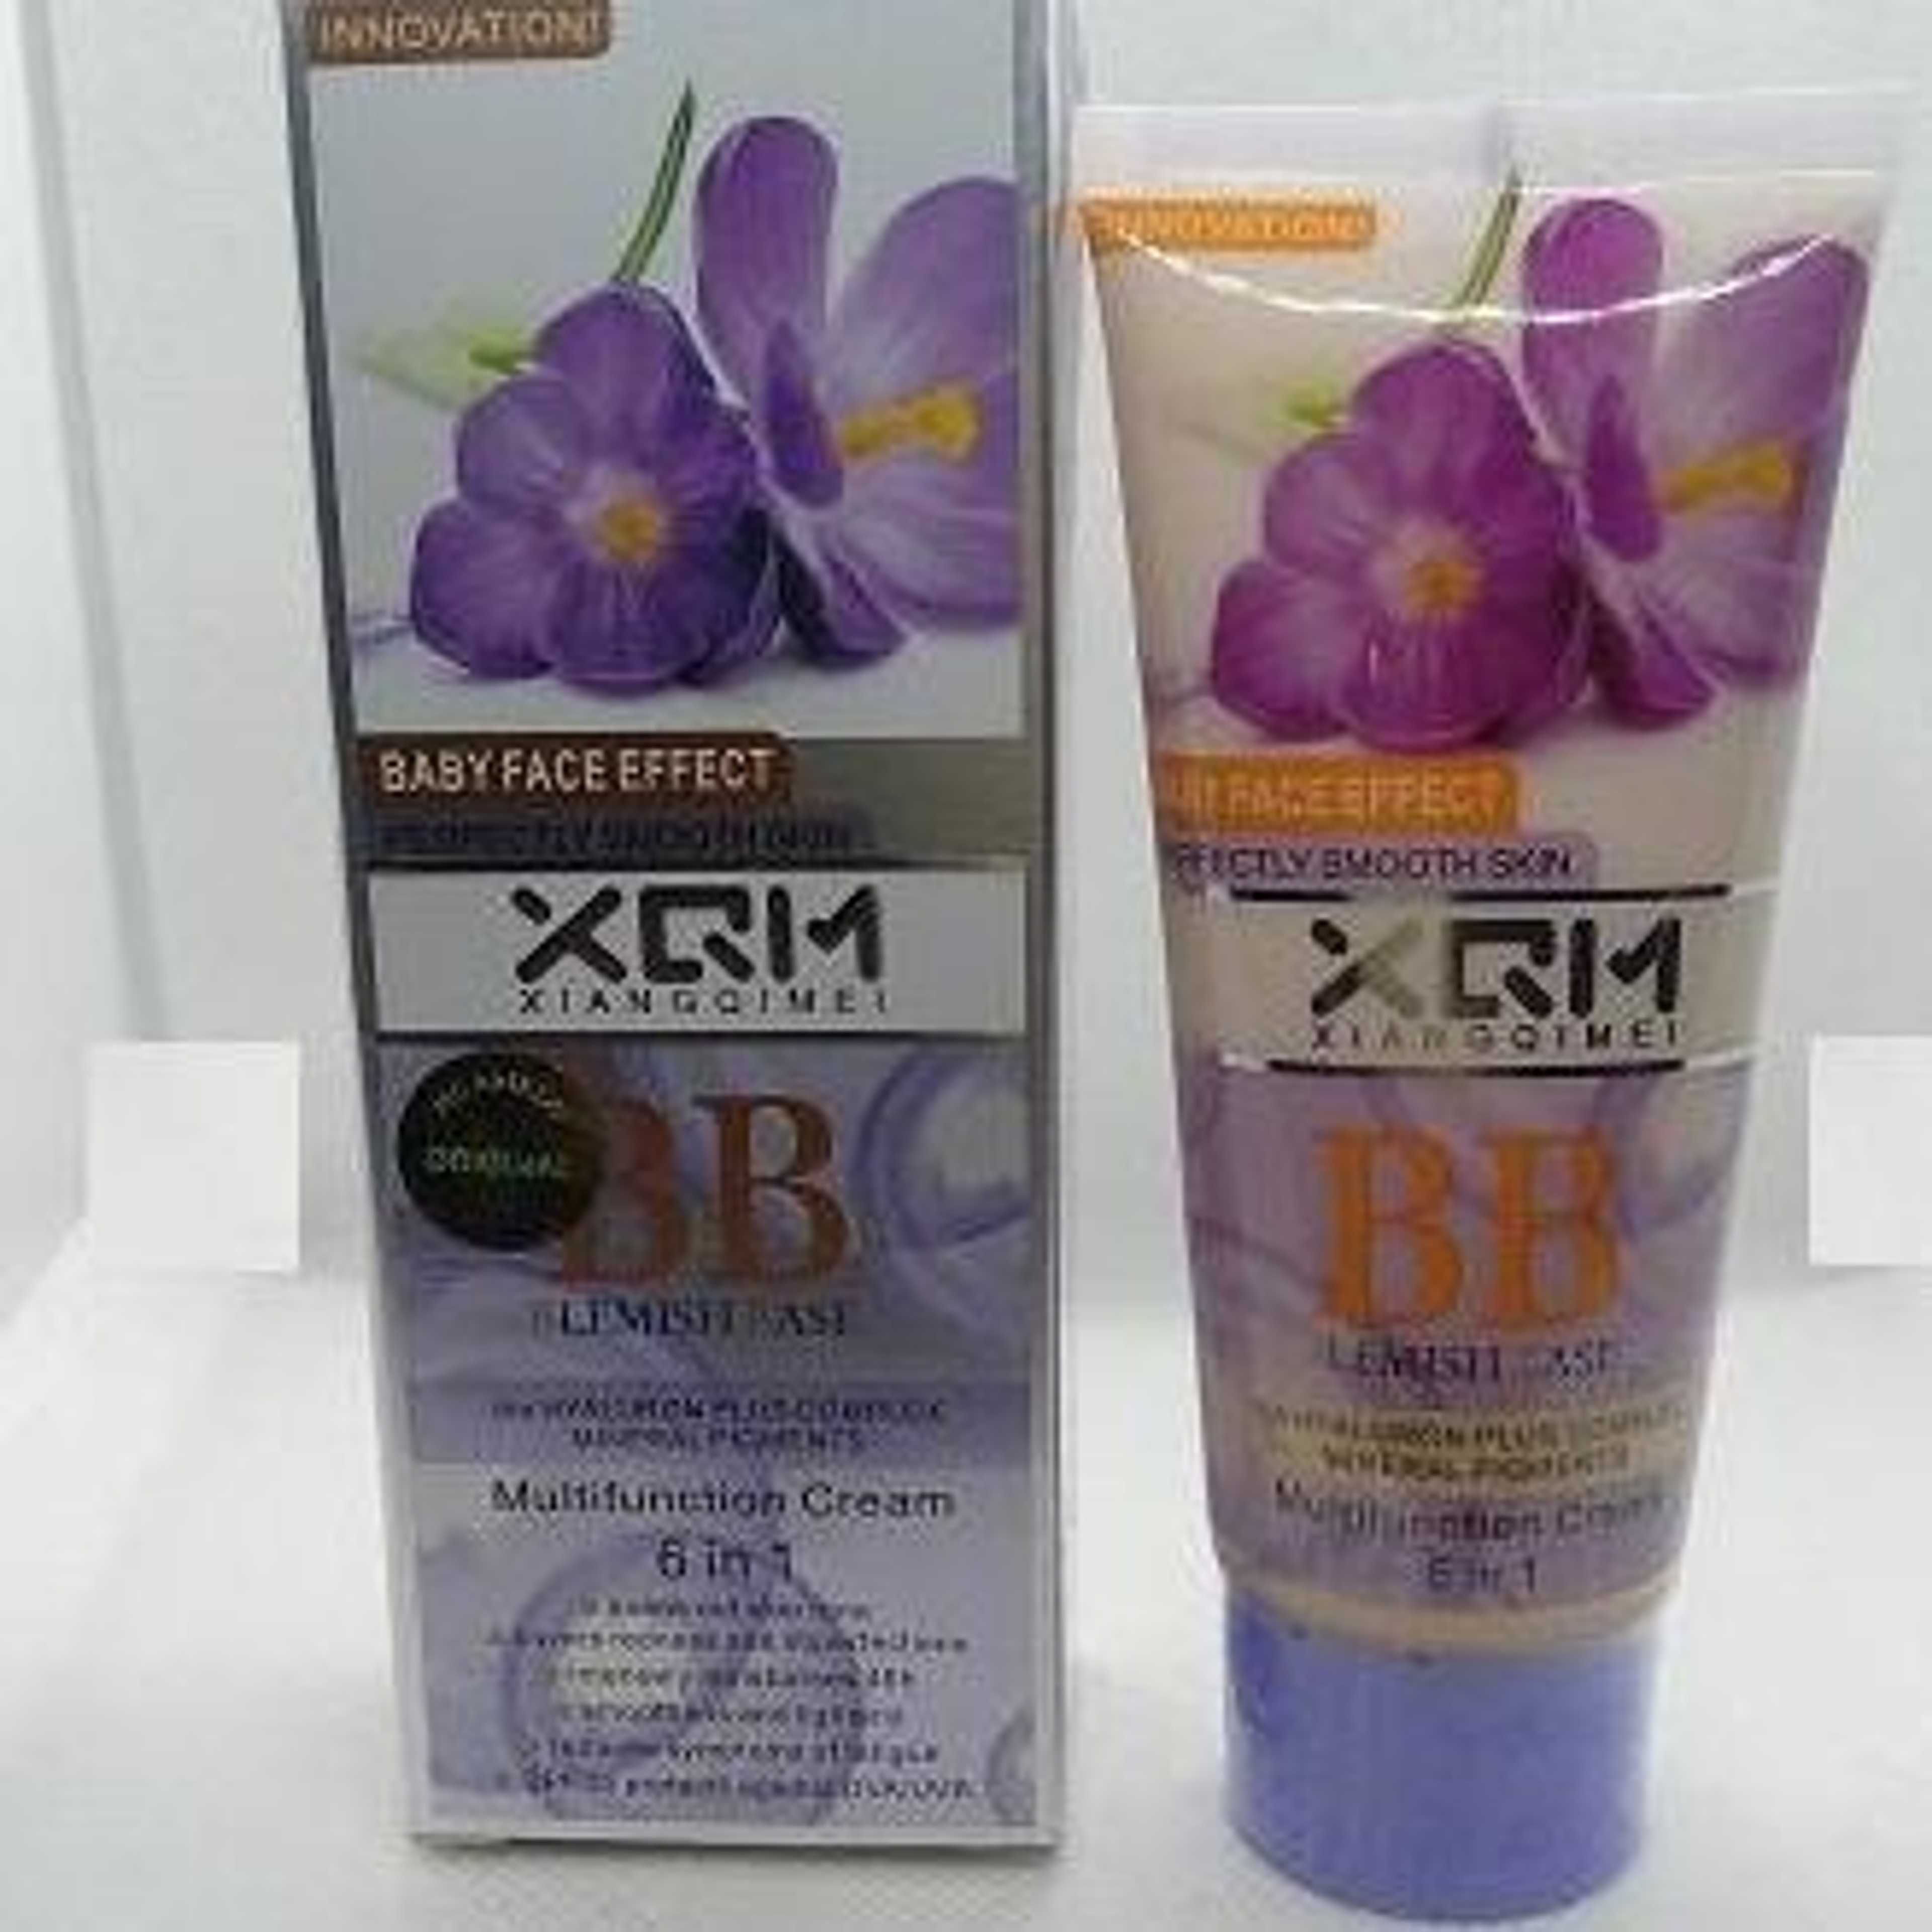 XQM BB Cream Blemish Base 6 in 1 Multifunction Cream Baby Face Foundation Effect With SPF 65ml